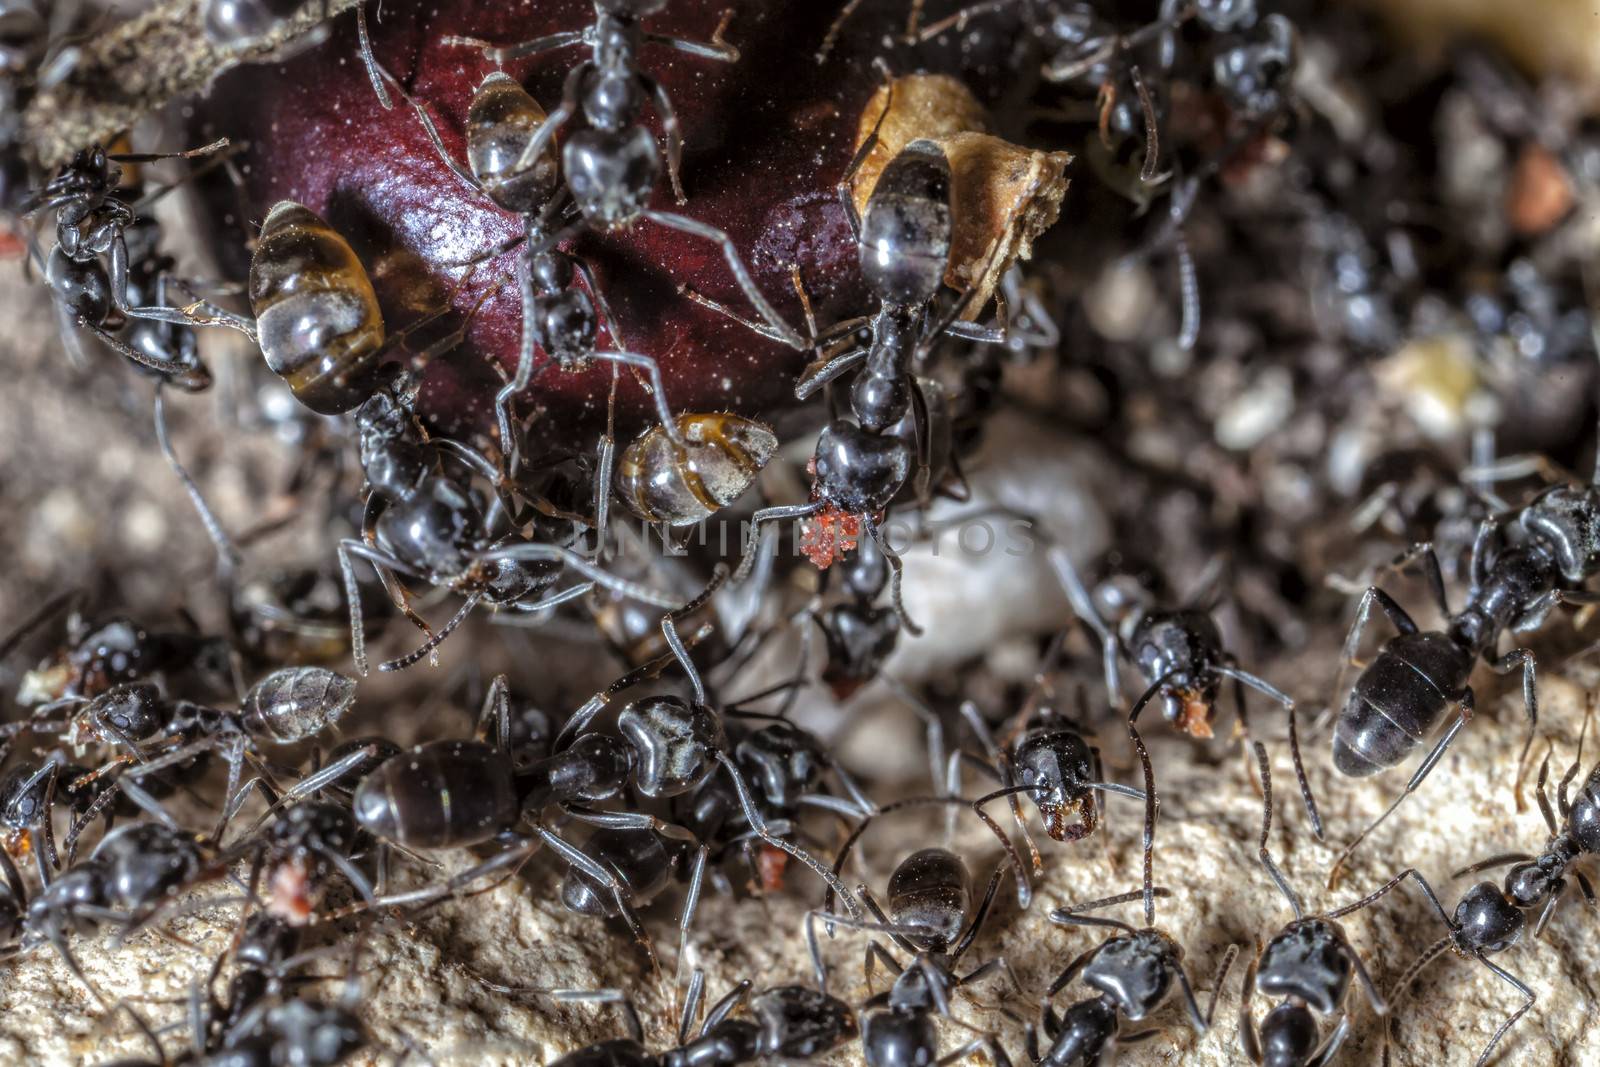 The black garden ant (Lasius niger) is a formicine ant, the type species of the subgenus Lasius, found all over Europe